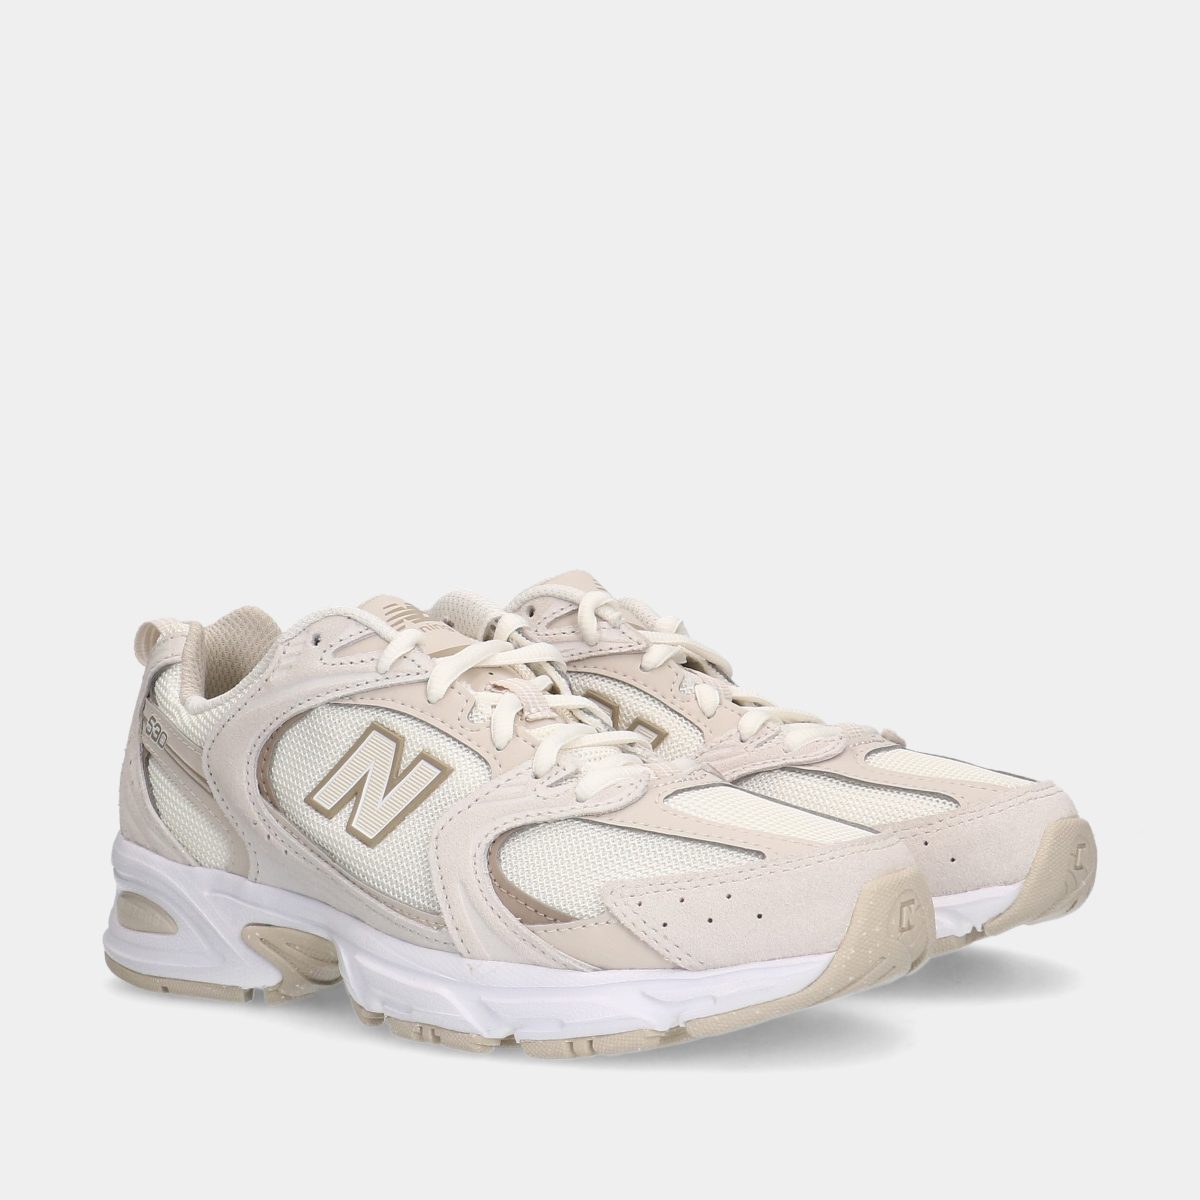 New Balance 530 White dames sneakers